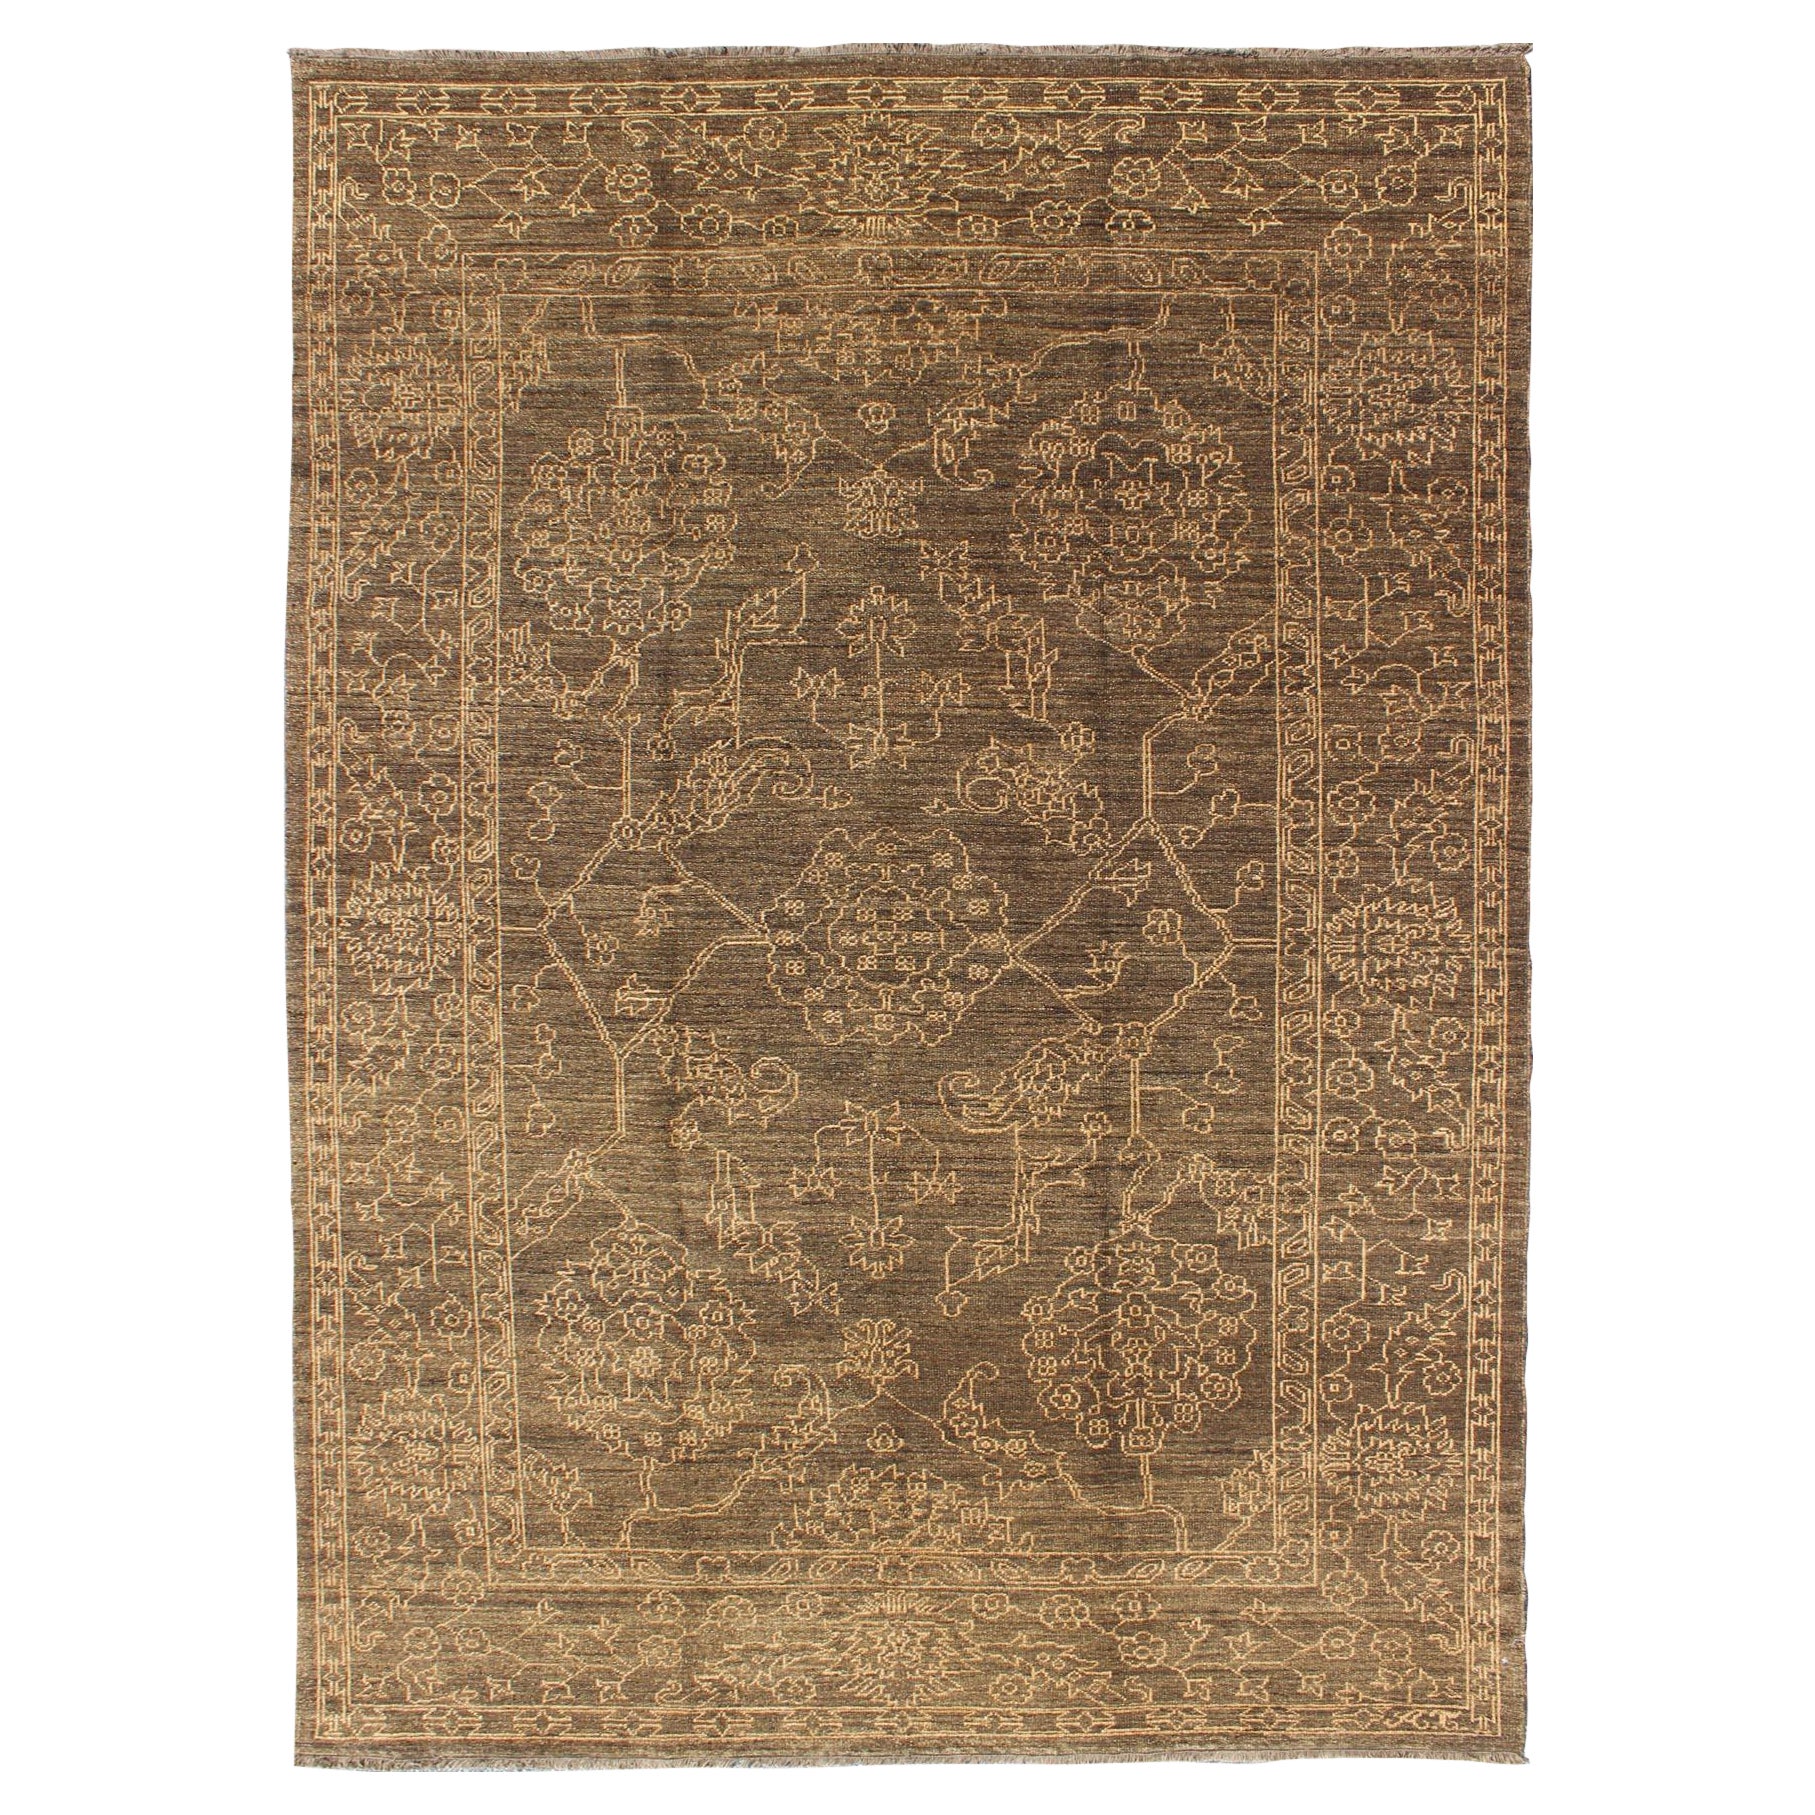 Fine Transitional Rug with Stylized Geometric Motifs in Brown and Light Tan